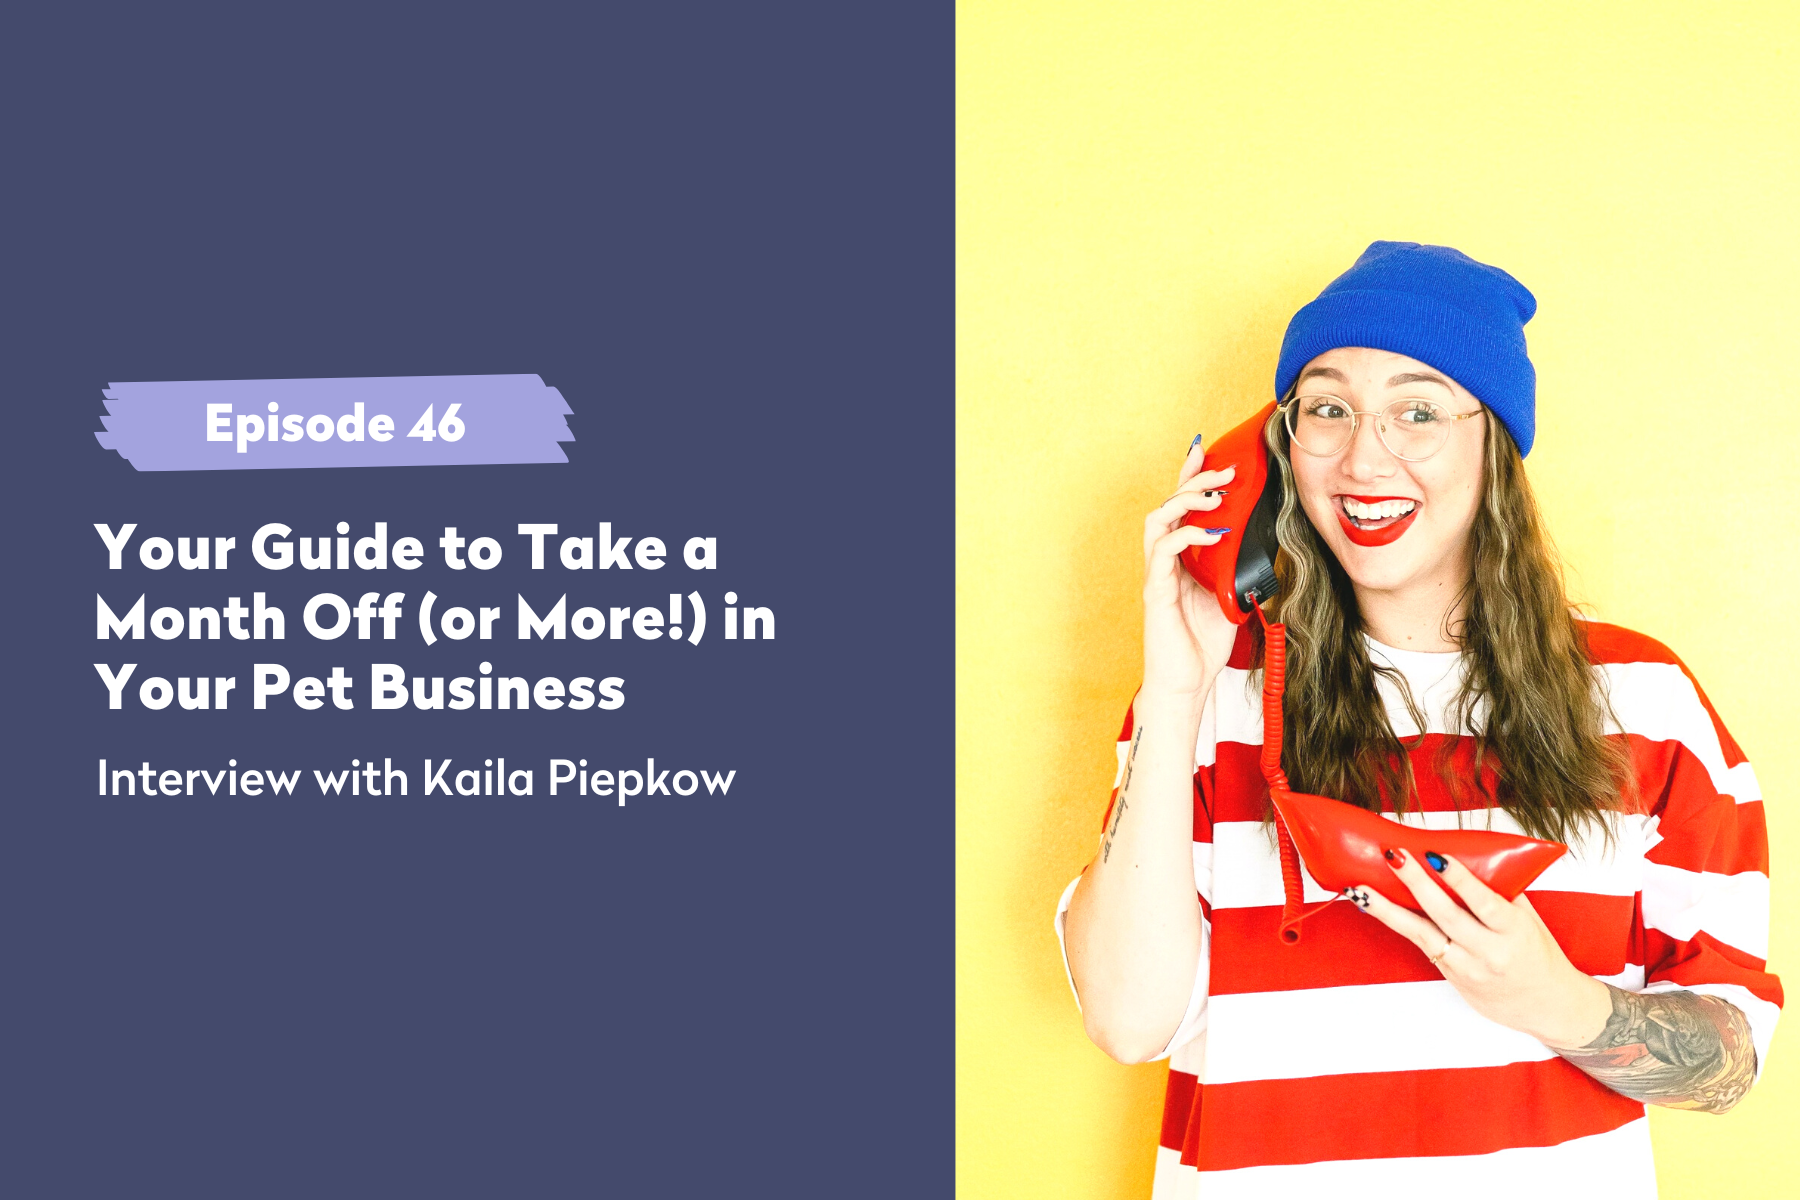 Episode 46 | Your Guide to Take a Month Off (or More!) in Your Pet Business